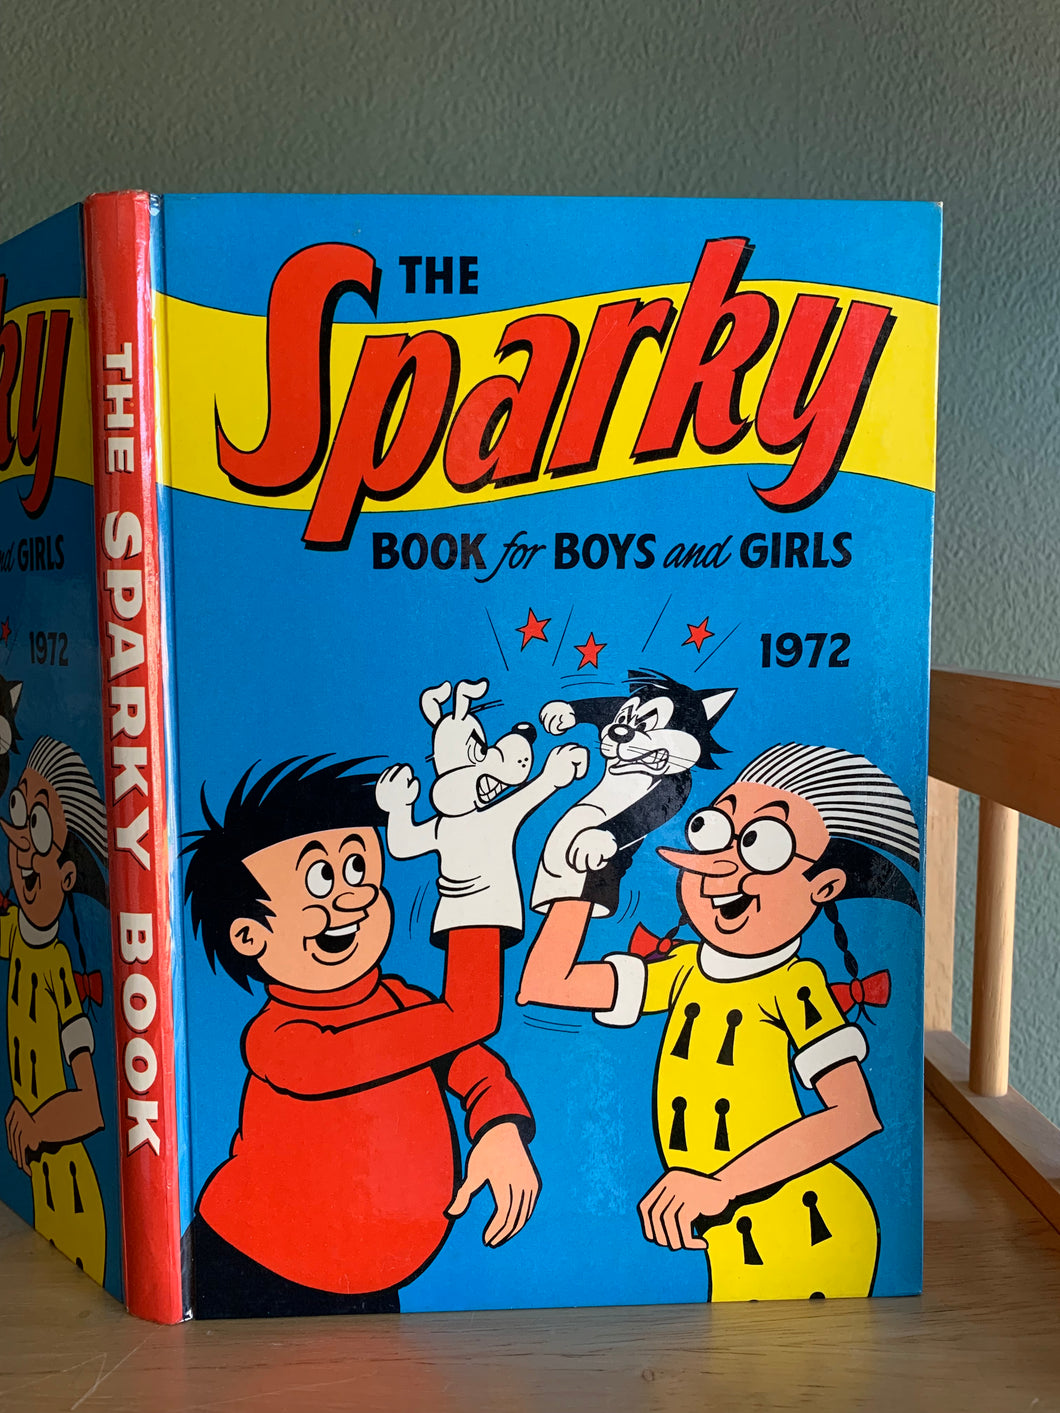 The Sparky Book for Boys and Girls 1972